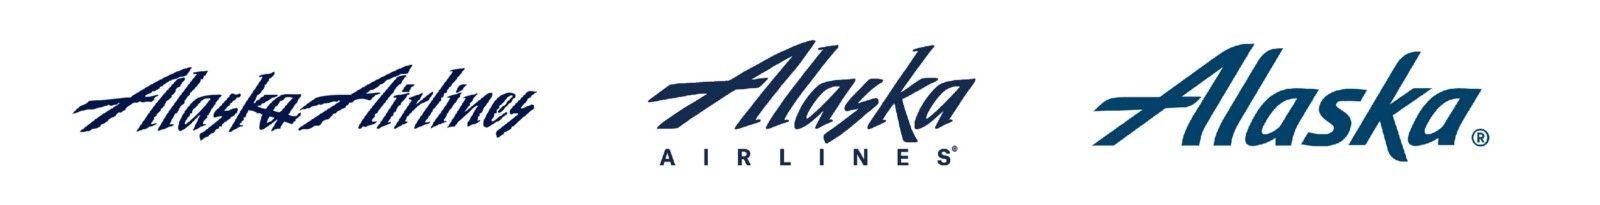 Alaska Airlines Old Logo - A Closer Look at the 2016 Alaska Airlines Rebrand – Look and Logo ...